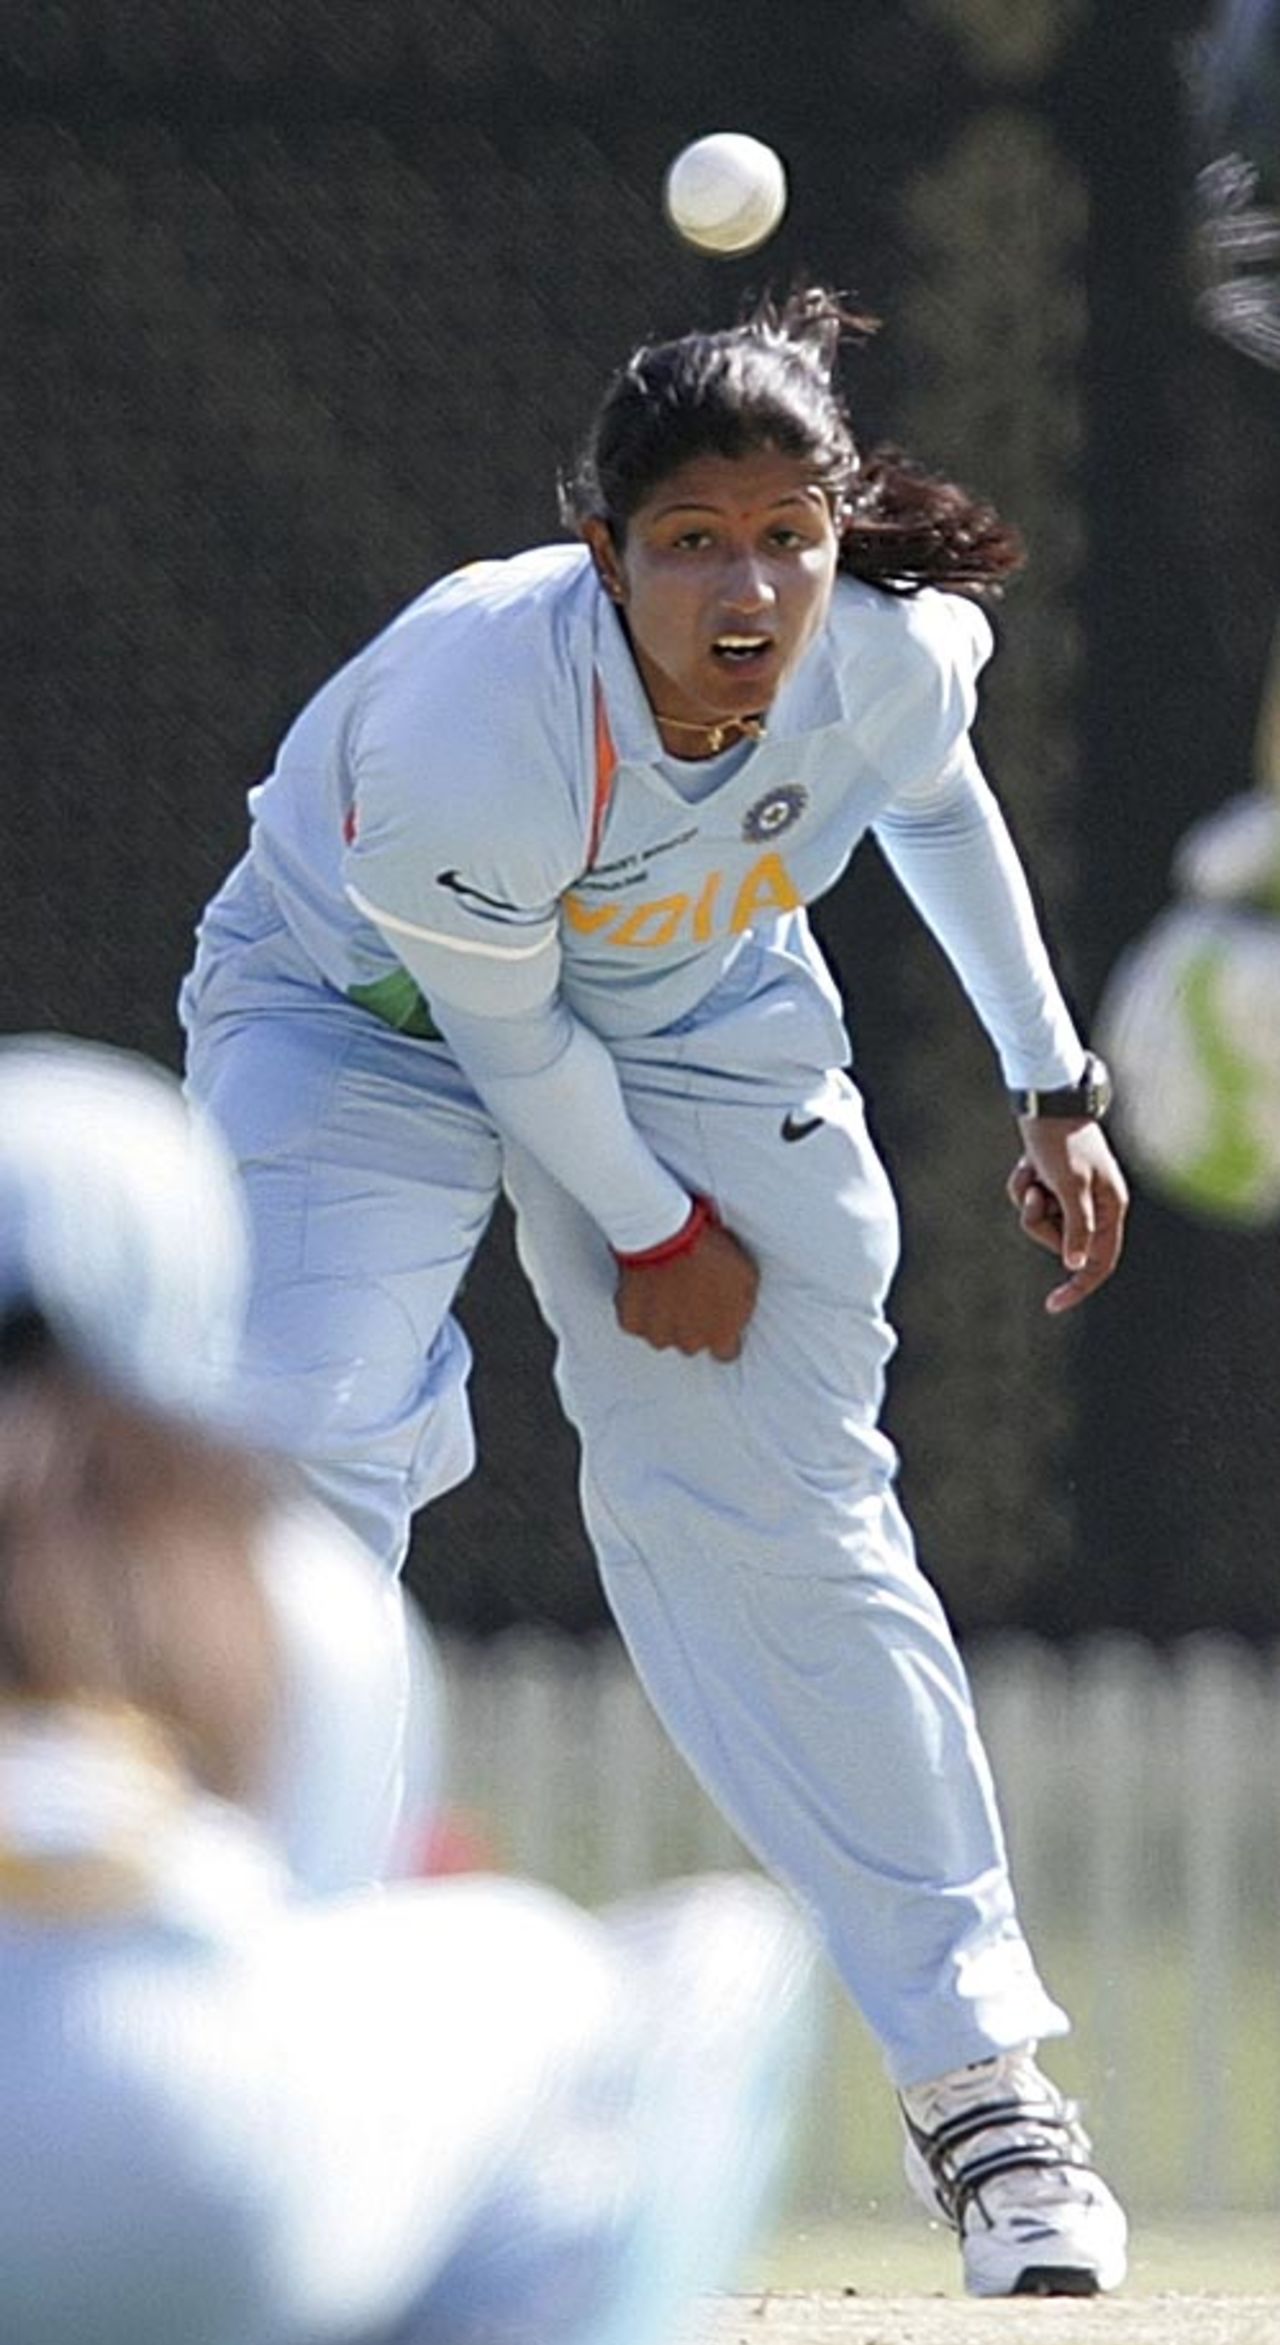 Rumeli Dhar in action, Australia v India, 3rd place play-off, women's World Cup, Sydney, March 21, 2009